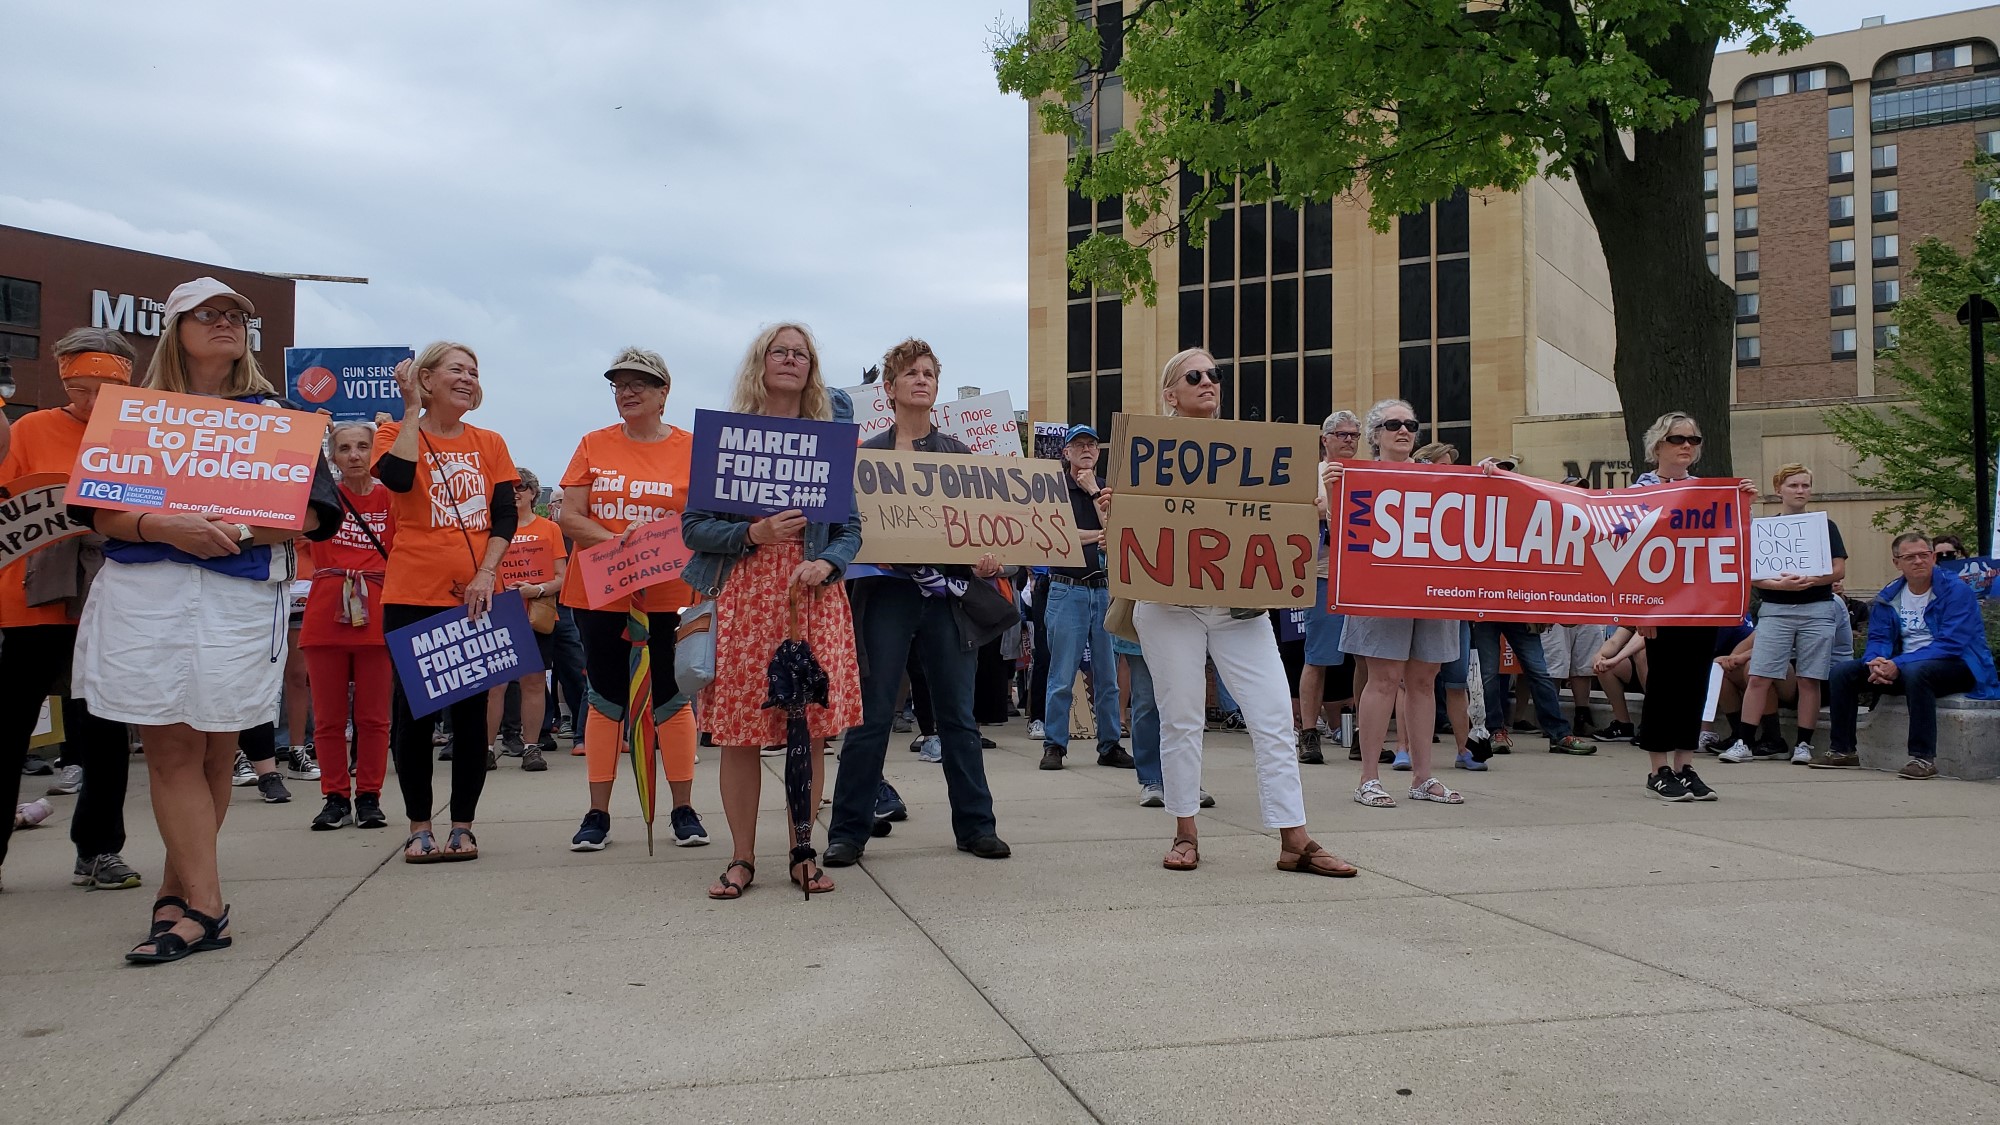 Madisonians “March for our Lives” for Gun Control